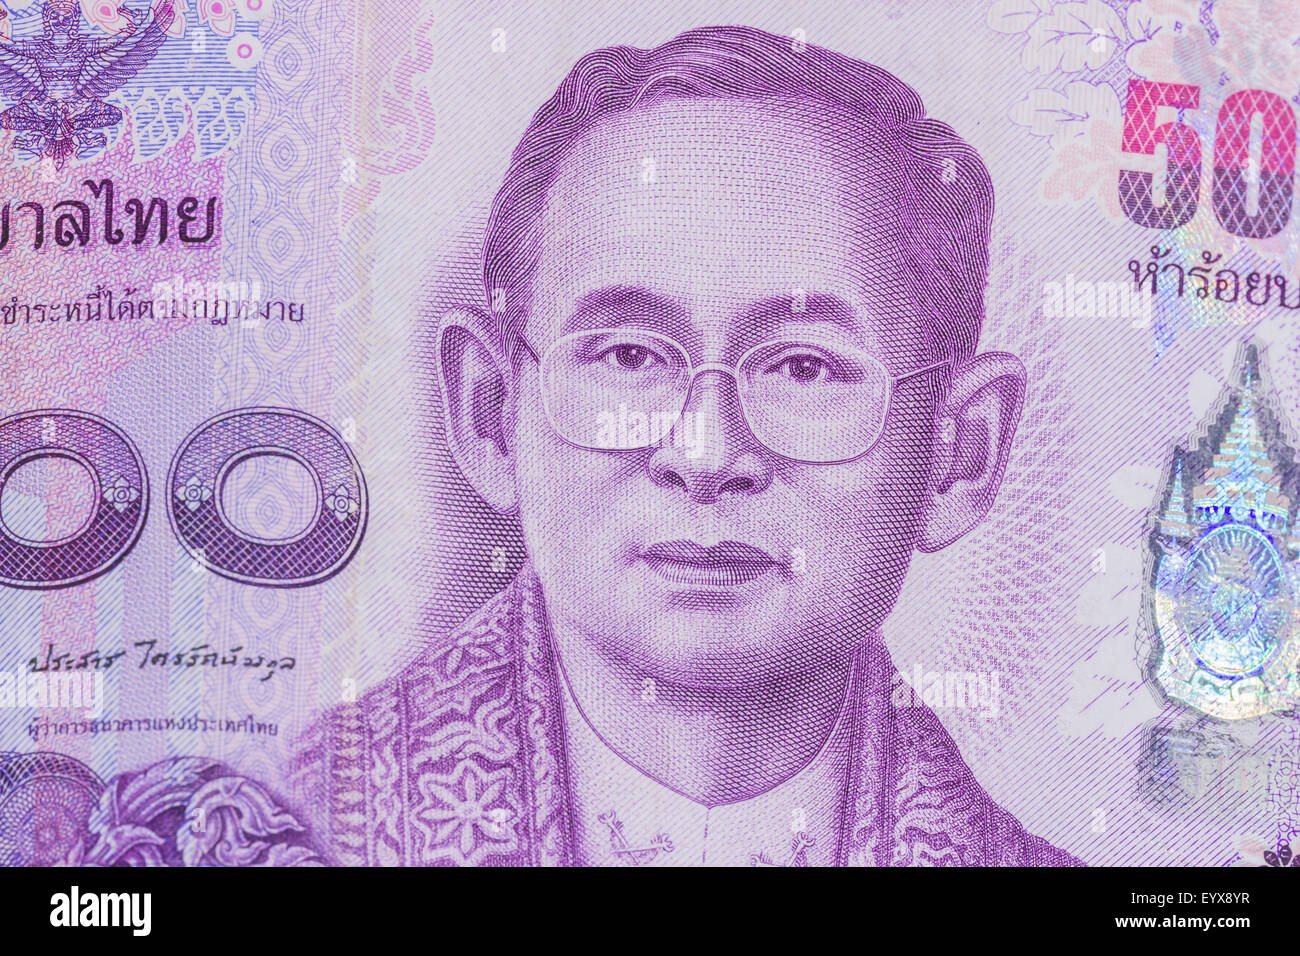 Close up of thailand currency, thai baht with the images of Thailand King. Denomination of 500 bahts. Stock Photo